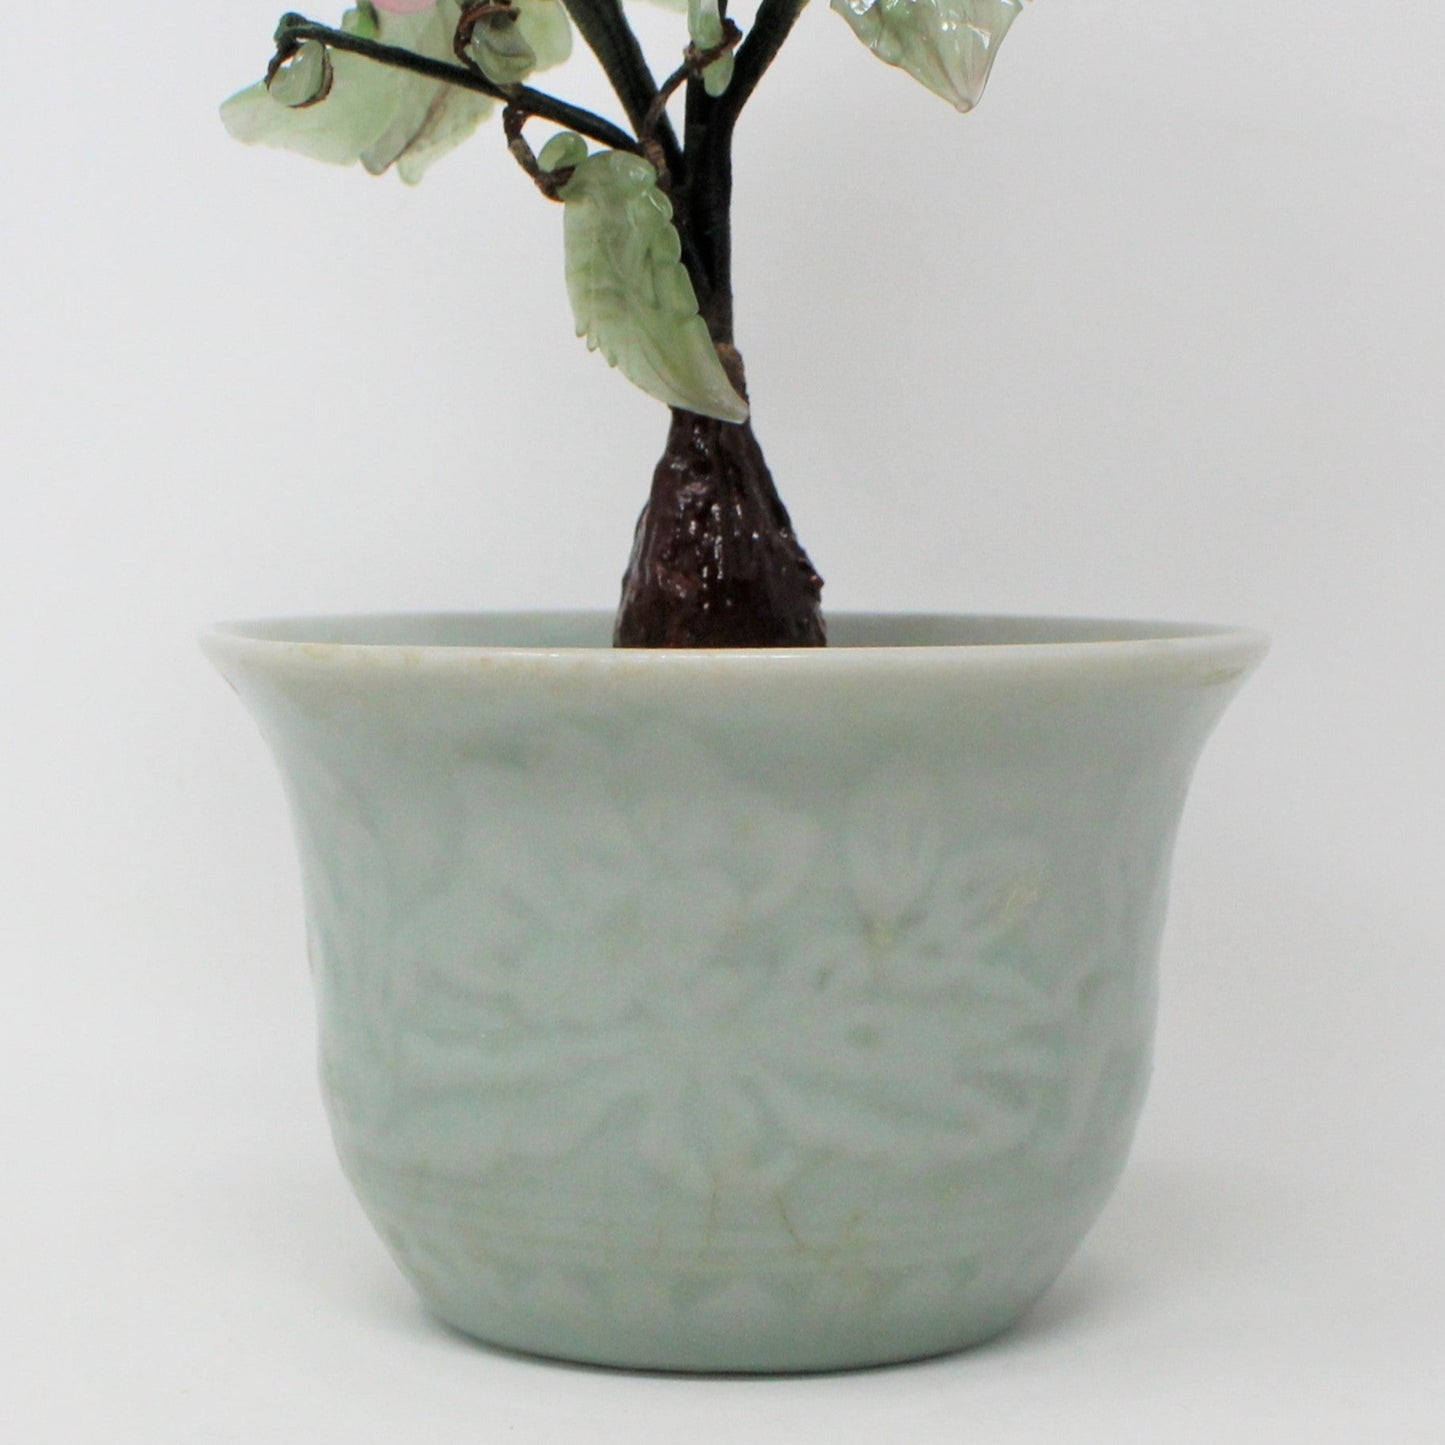 Sculpture, Jade Glass Bonsai Tree in Celadon Planter, Pink Floral / Green, Vintage (Imperfections))